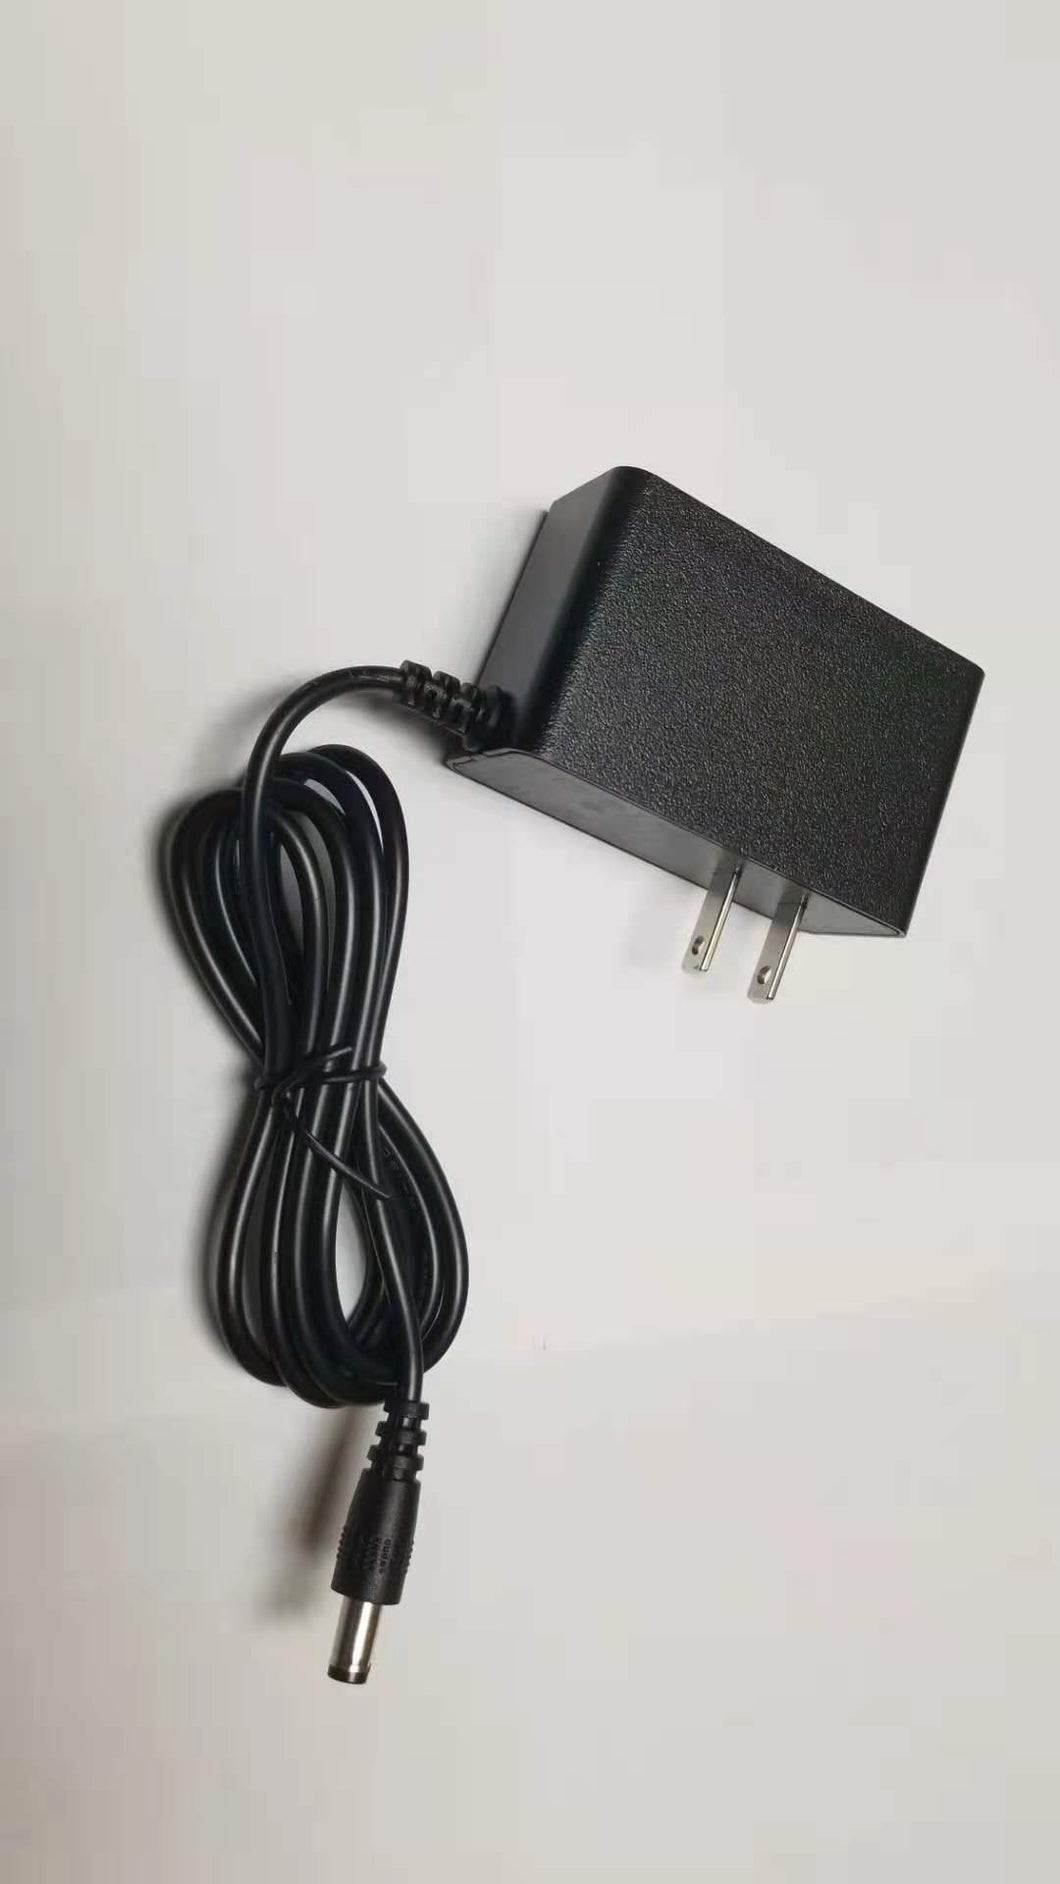 Power supply for POE Power Pack 12.6V 2A  with US plug